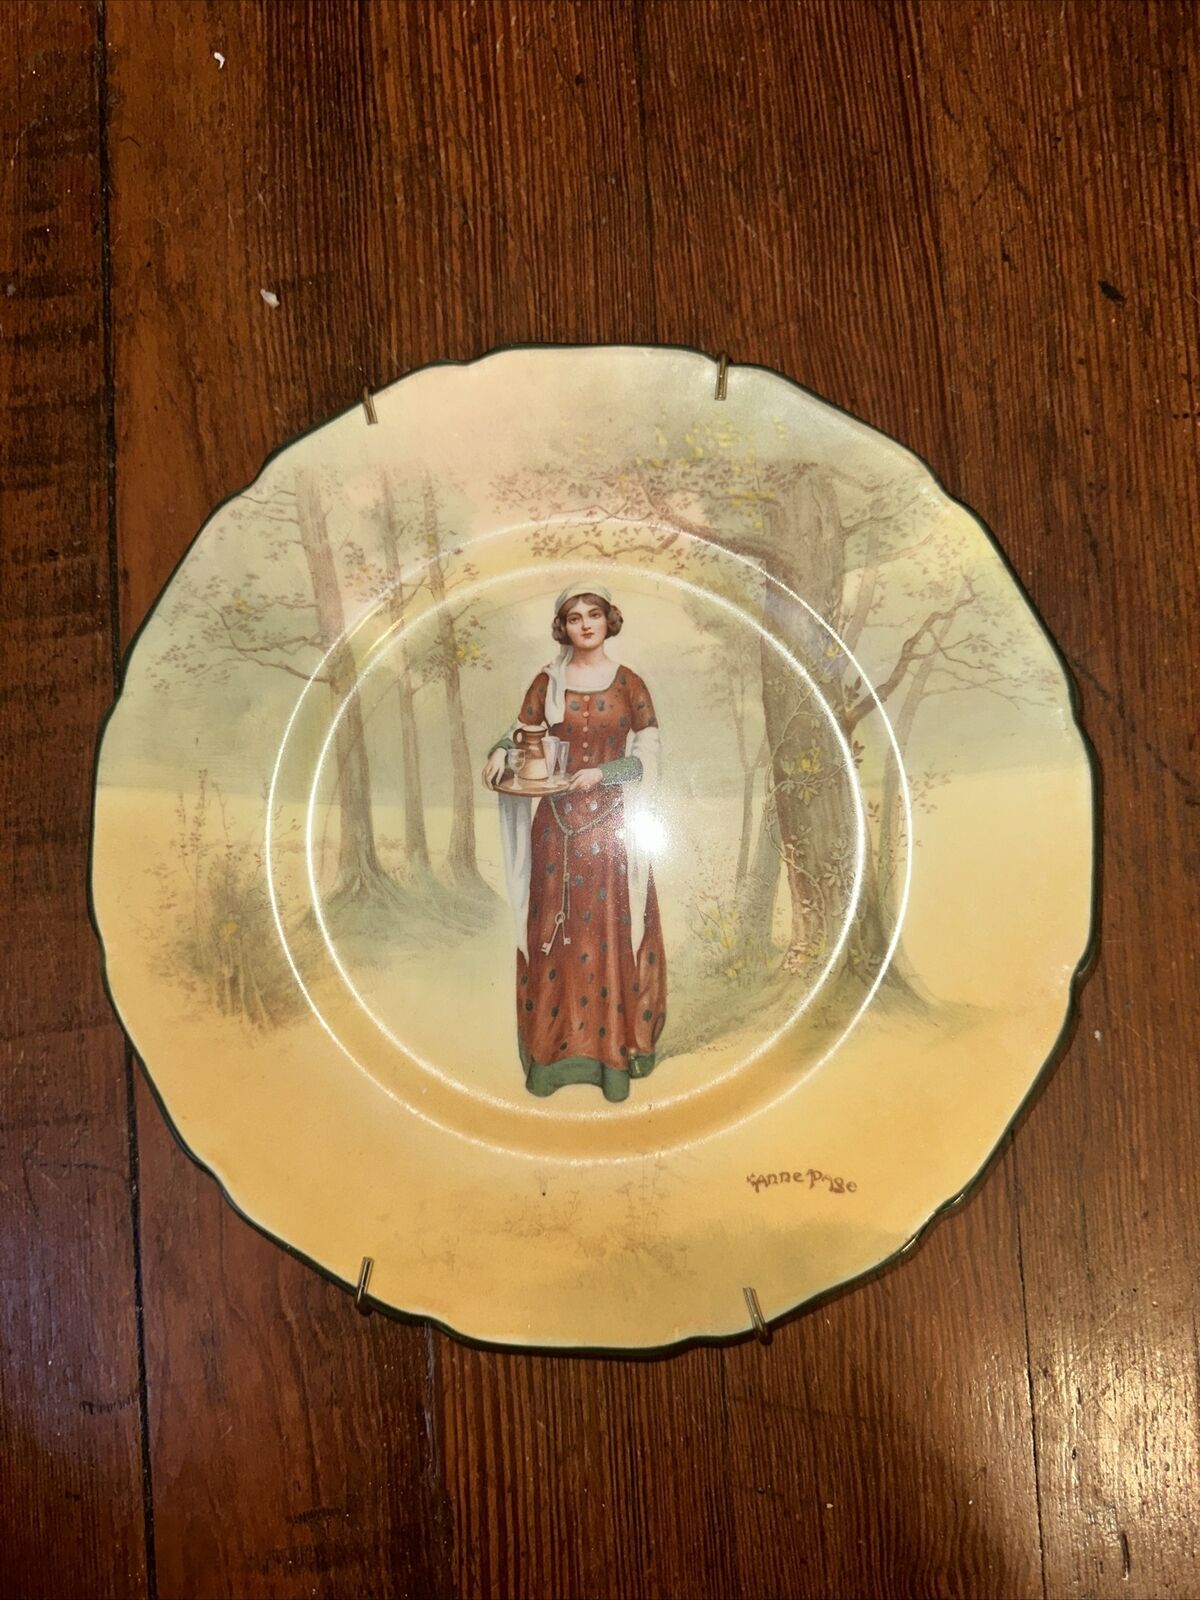 Early Royal Doulton Shakespearean Anne Page E7267 plate